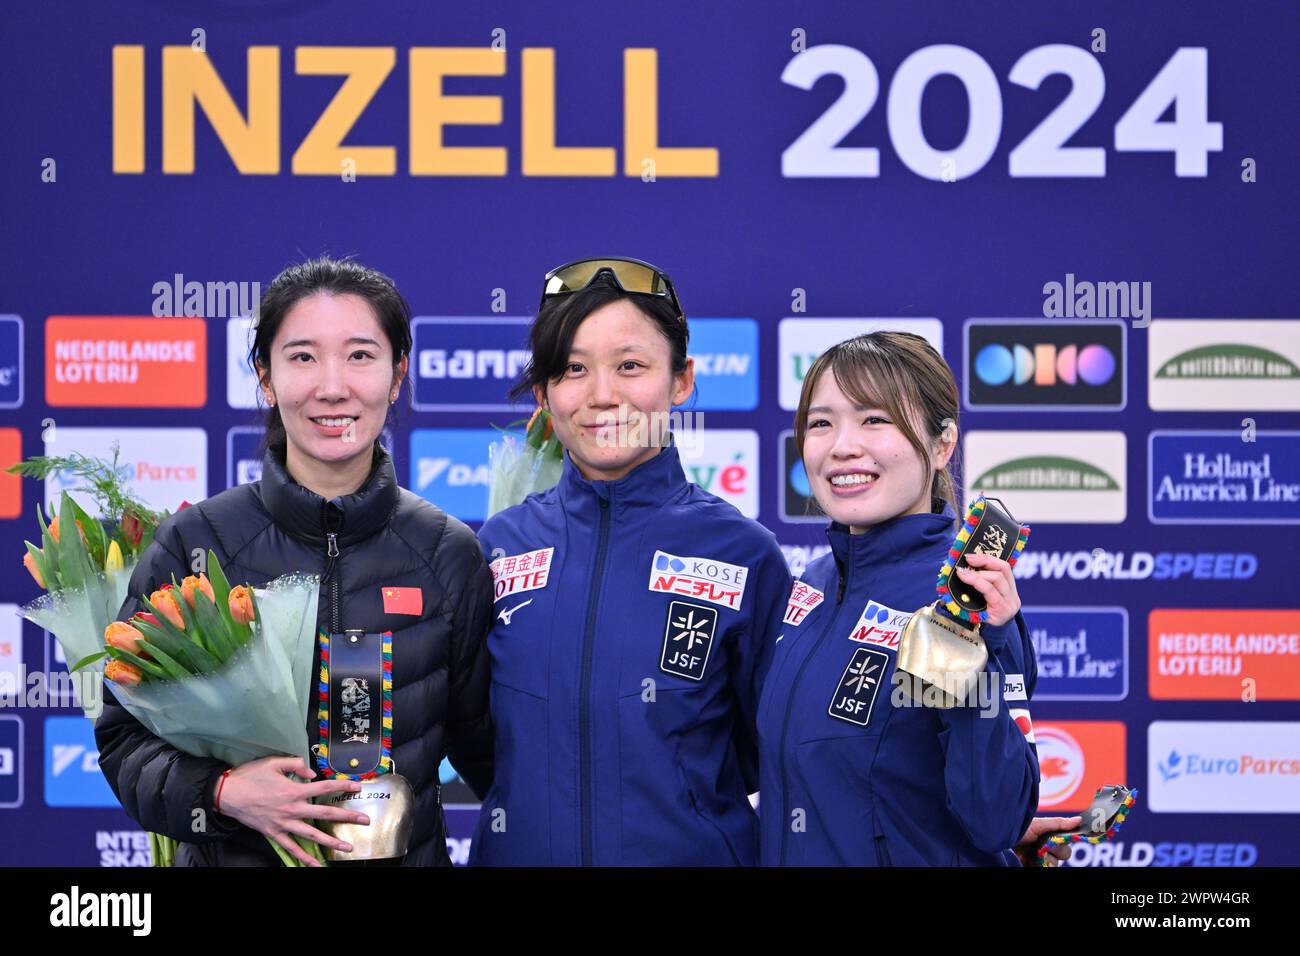 Inzell, Germany. 09th Mar, 2024. Speed skating, sprint world championships, women, 500 meter all-around, award ceremony. Han Mei (l-r, 2nd place, China), Miho Takagi (1st place, Japan) and Ayano Sato (3rd place, Japan) are delighted with their placings. Credit: Peter Kneffel/dpa/Alamy Live News Stock Photo